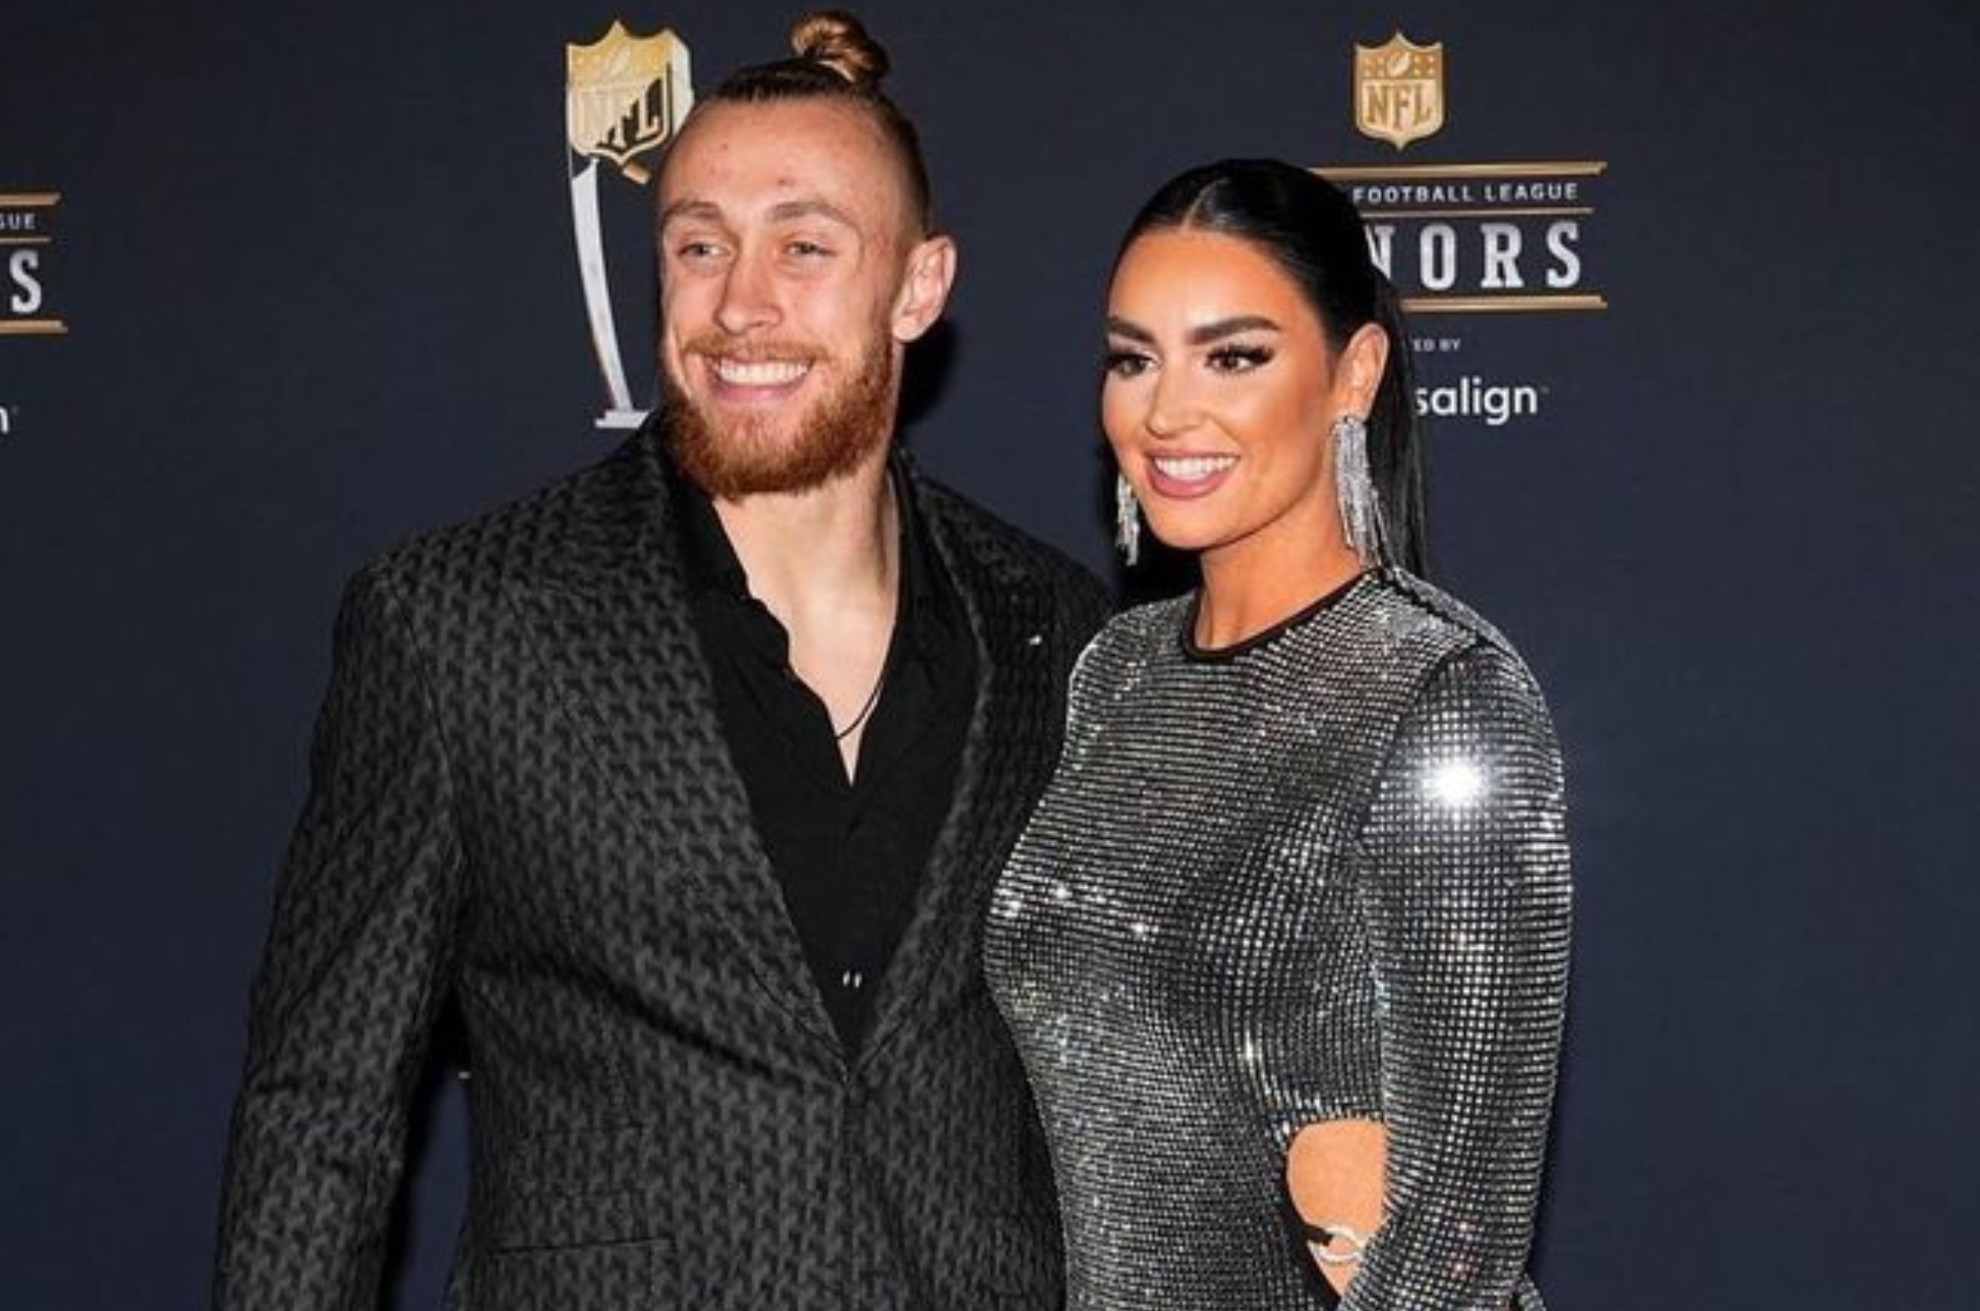 George Kittle, Niners tight end and his wife, Claire.